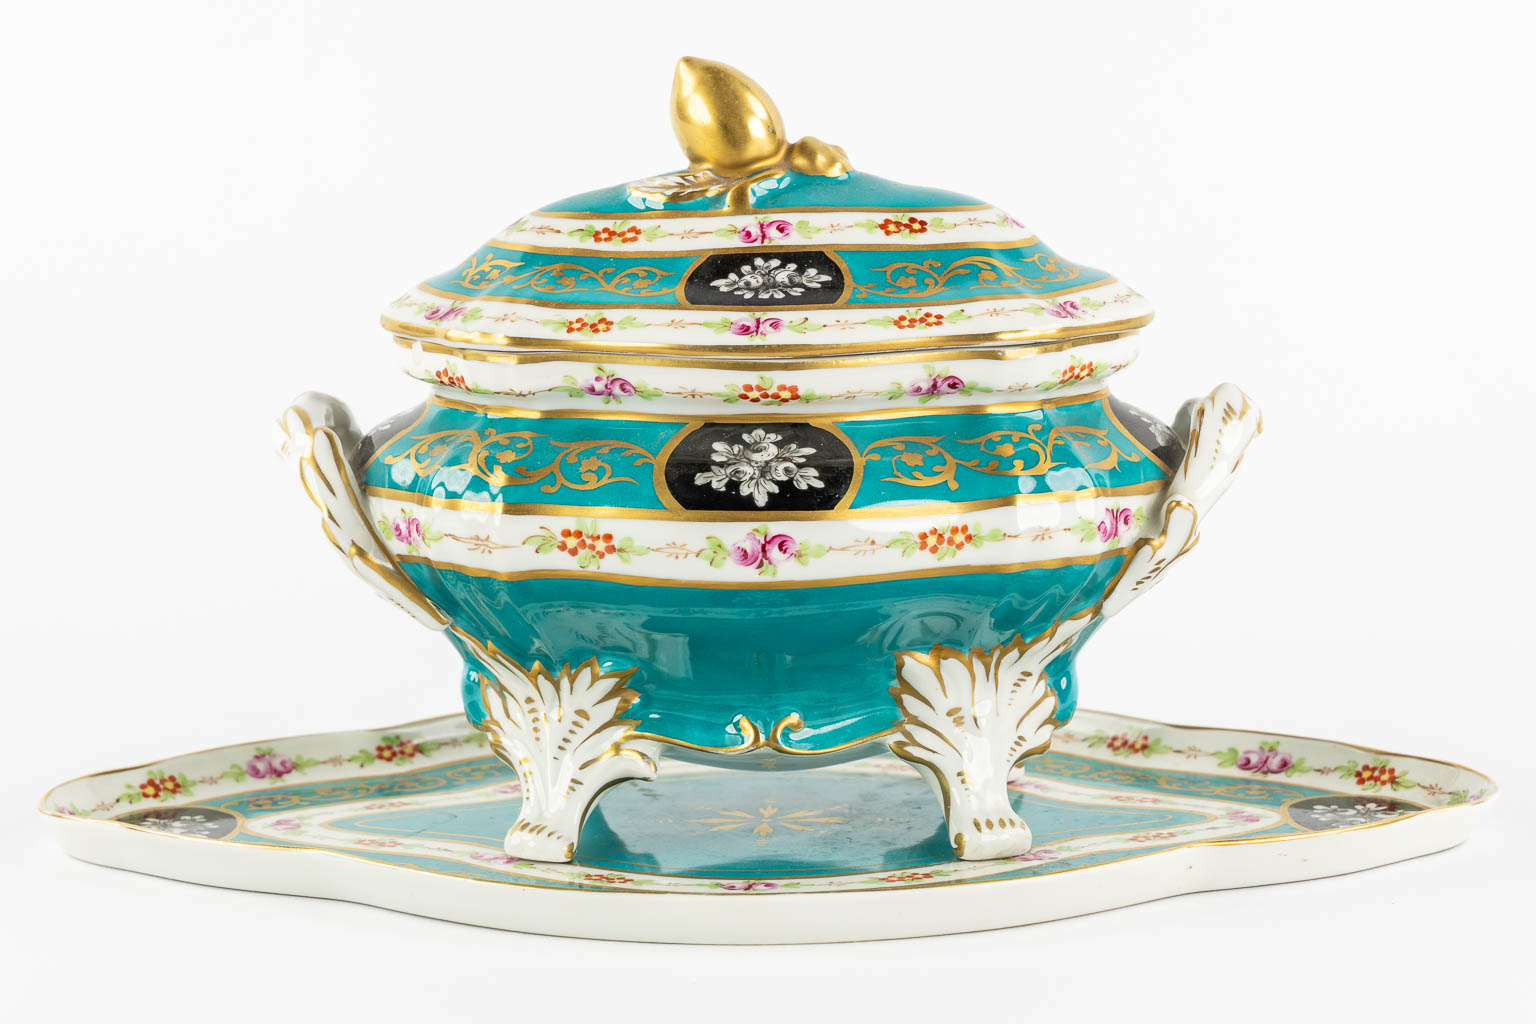 Pillivuyt, Paris, a tureen on a plate and an oval bowl. 20th C. (L:23 x W:36 x H:20 cm) - Image 13 of 21